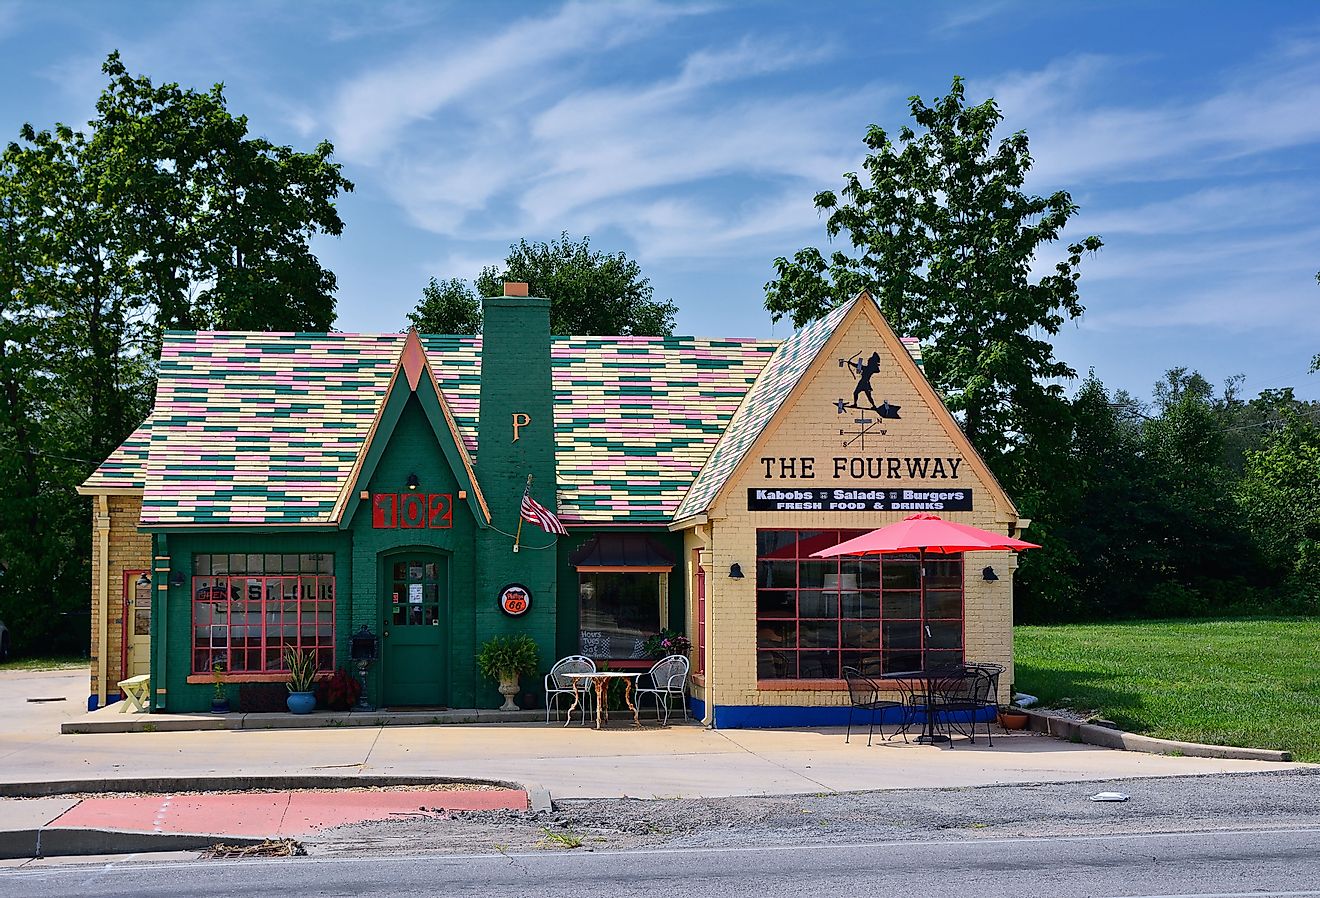 The Fourway diner in Cuba, Missouri, located on historic Route 66. Image credit StockPhotoAstur via Shutterstock